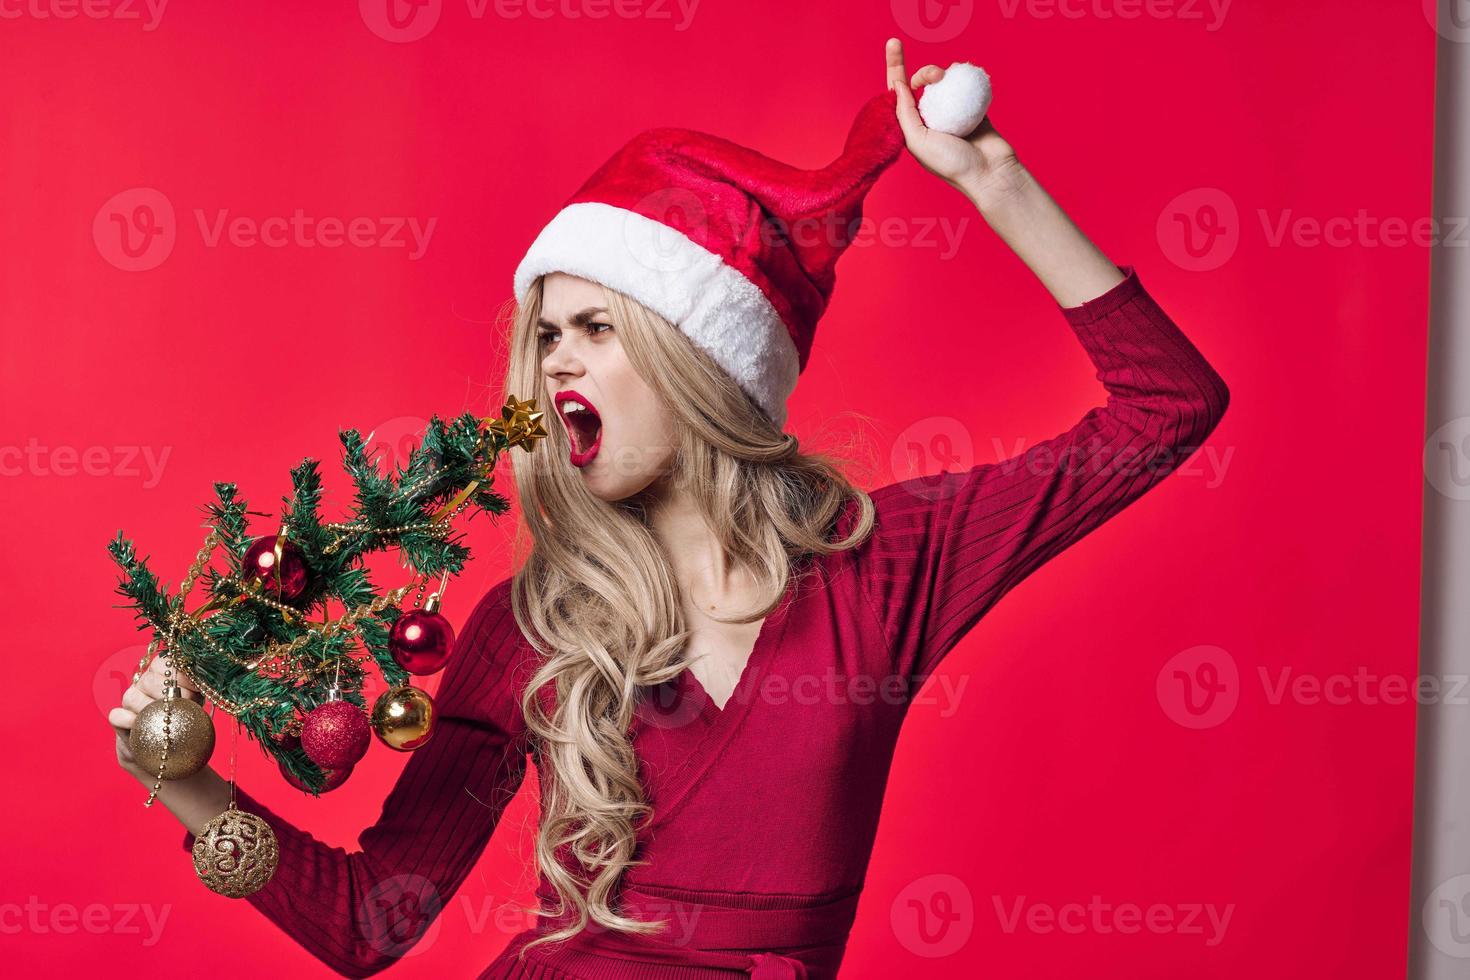 woman in red dress christmas tree toys holiday pink background photo